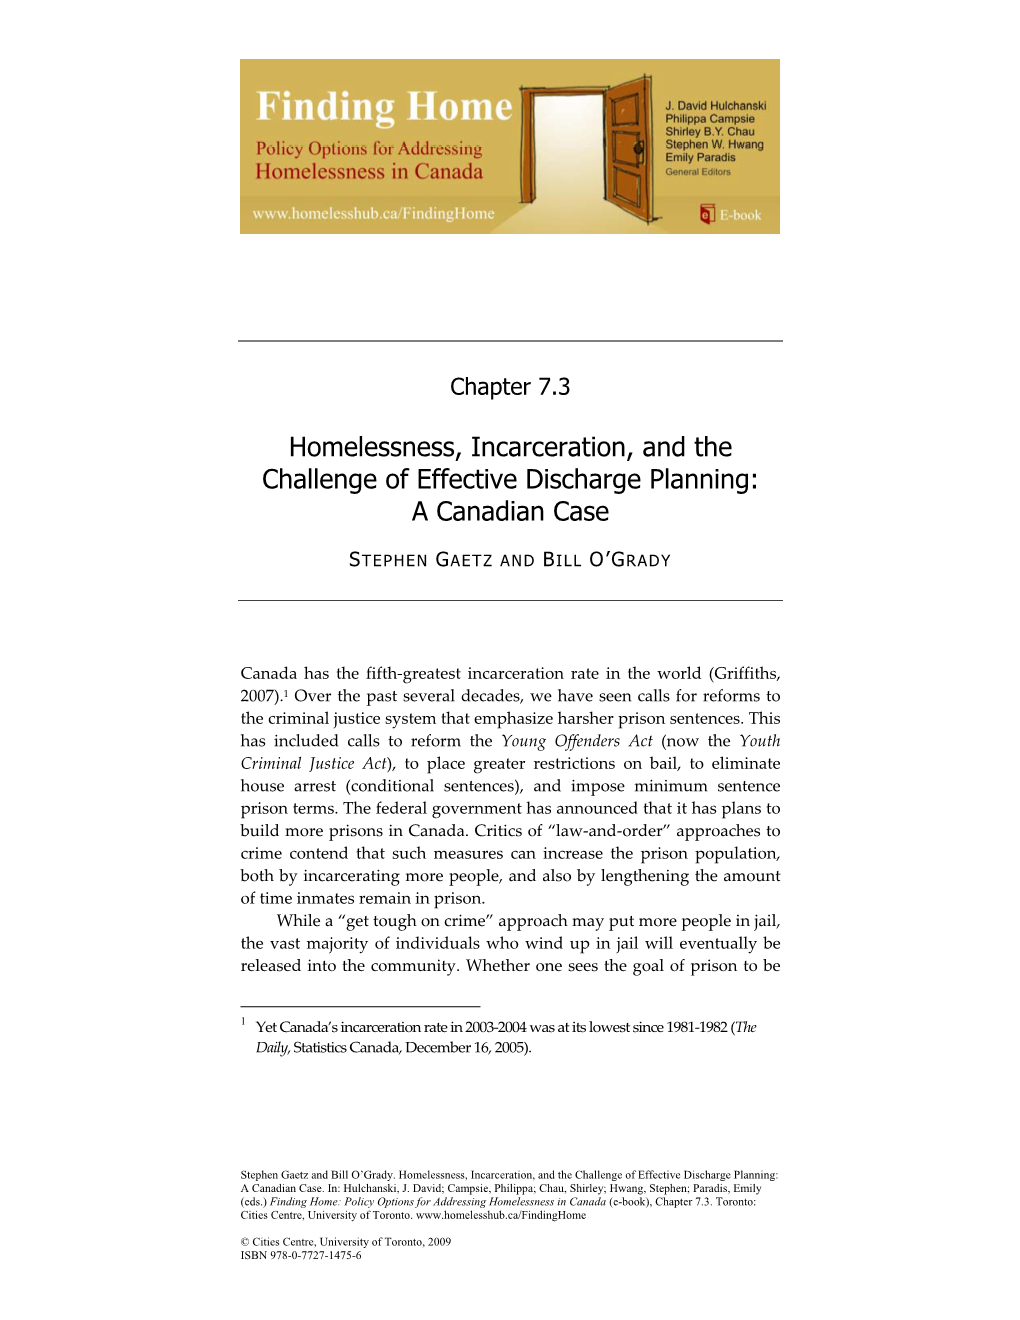 Homelessness, Incarceration, and the Challenge of Effective Discharge Planning: a Canadian Case